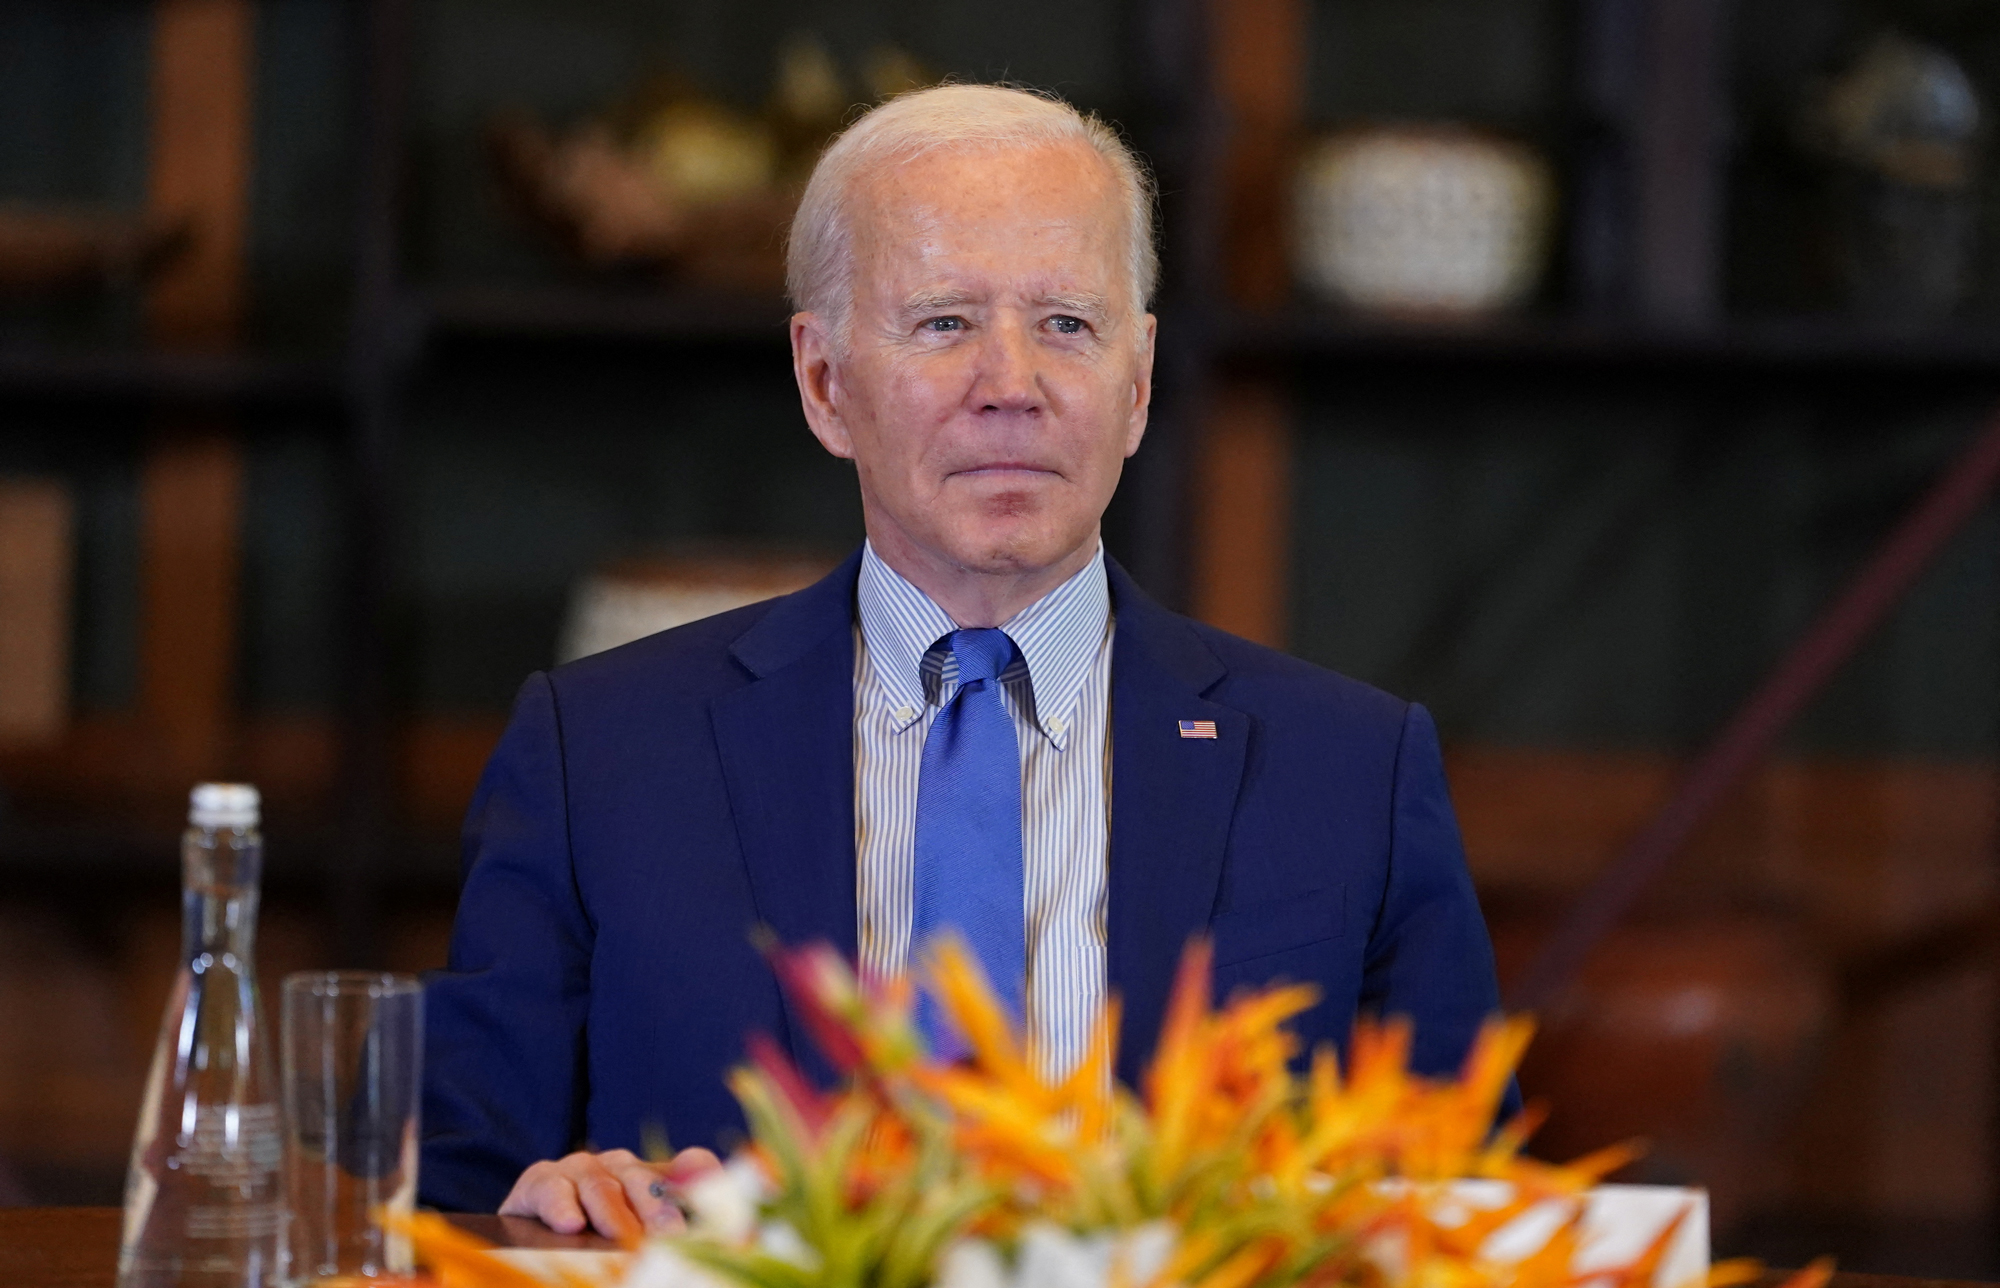 US President Joe Biden attends an emergency meeting of global leaders in Bali, Indonesia, after a missile explosion in Poland, on Wednesday.